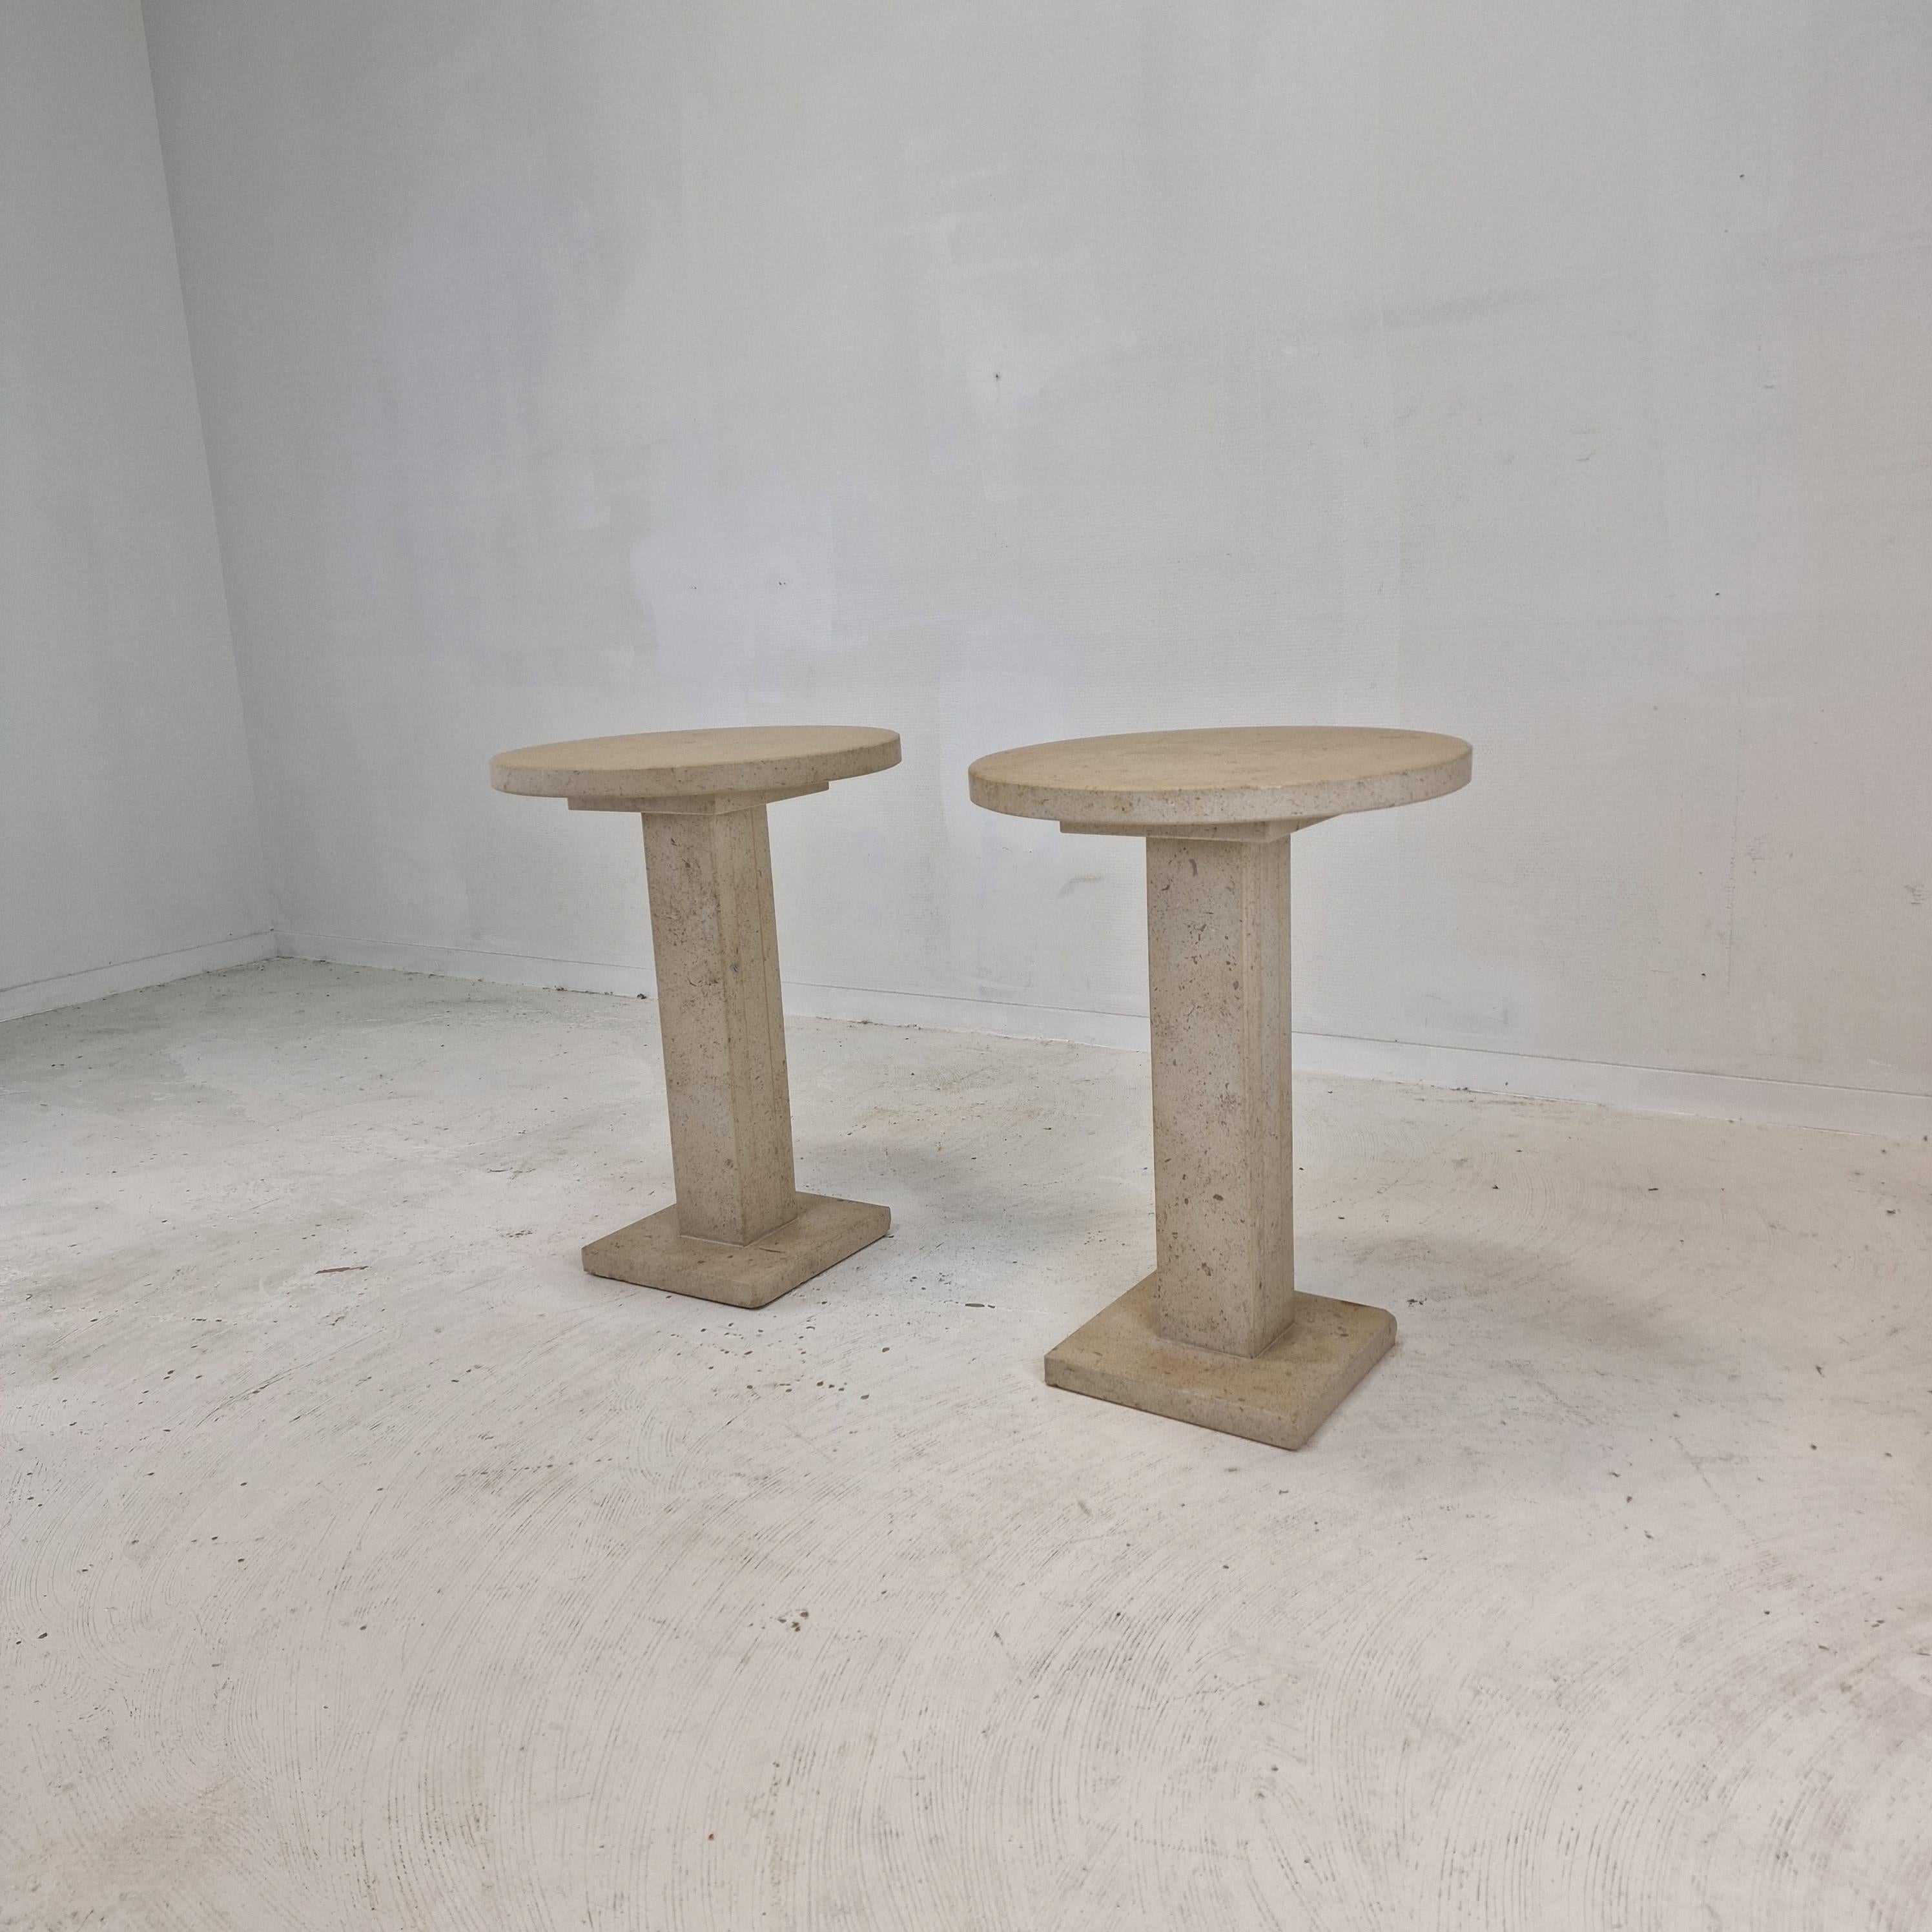 Hand-Crafted Set of 2 Italian Travertine or Stone Pedestals or Side Tables, 1980s For Sale